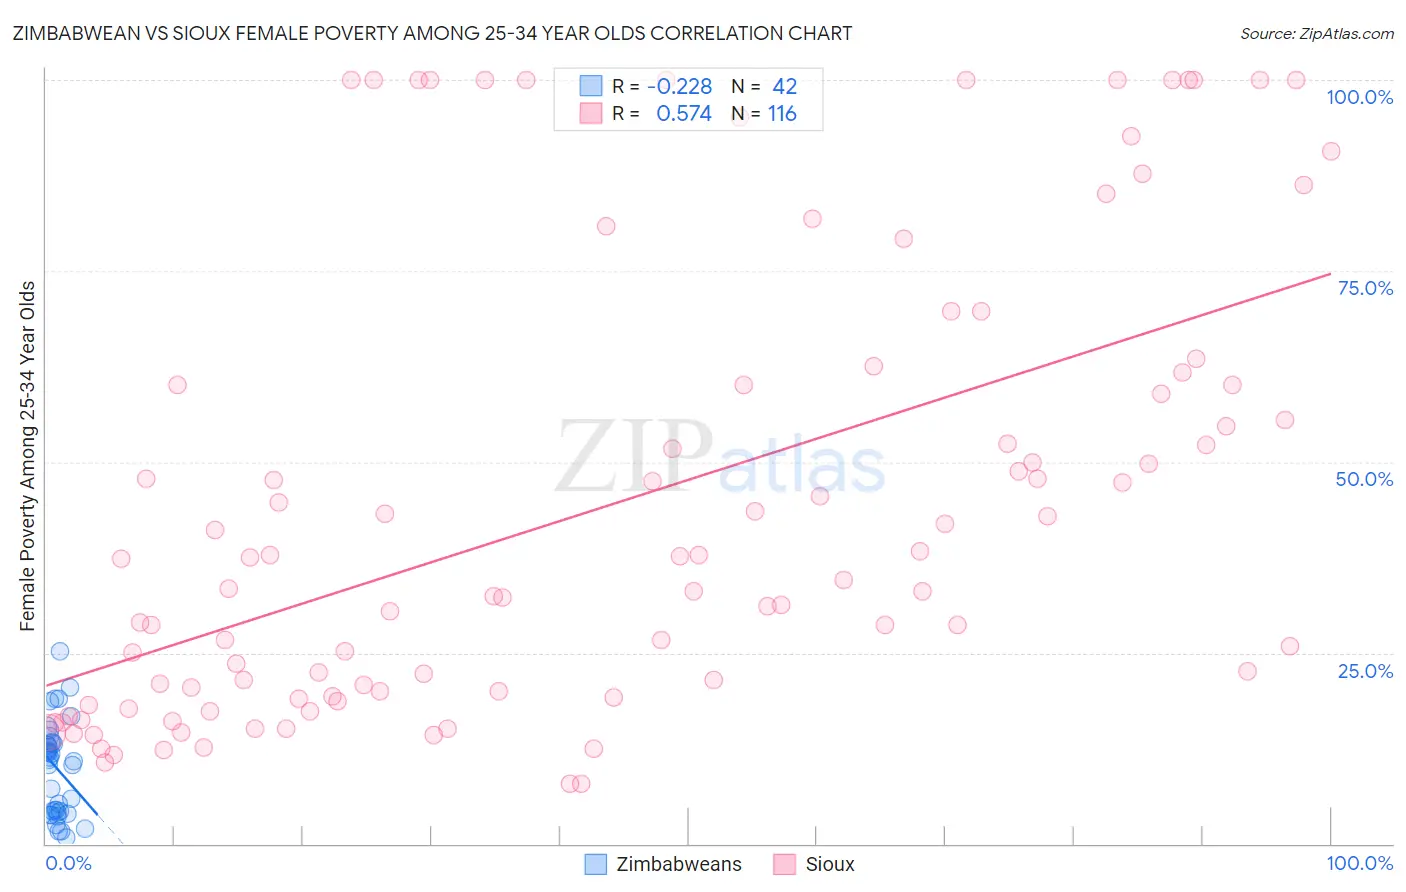 Zimbabwean vs Sioux Female Poverty Among 25-34 Year Olds